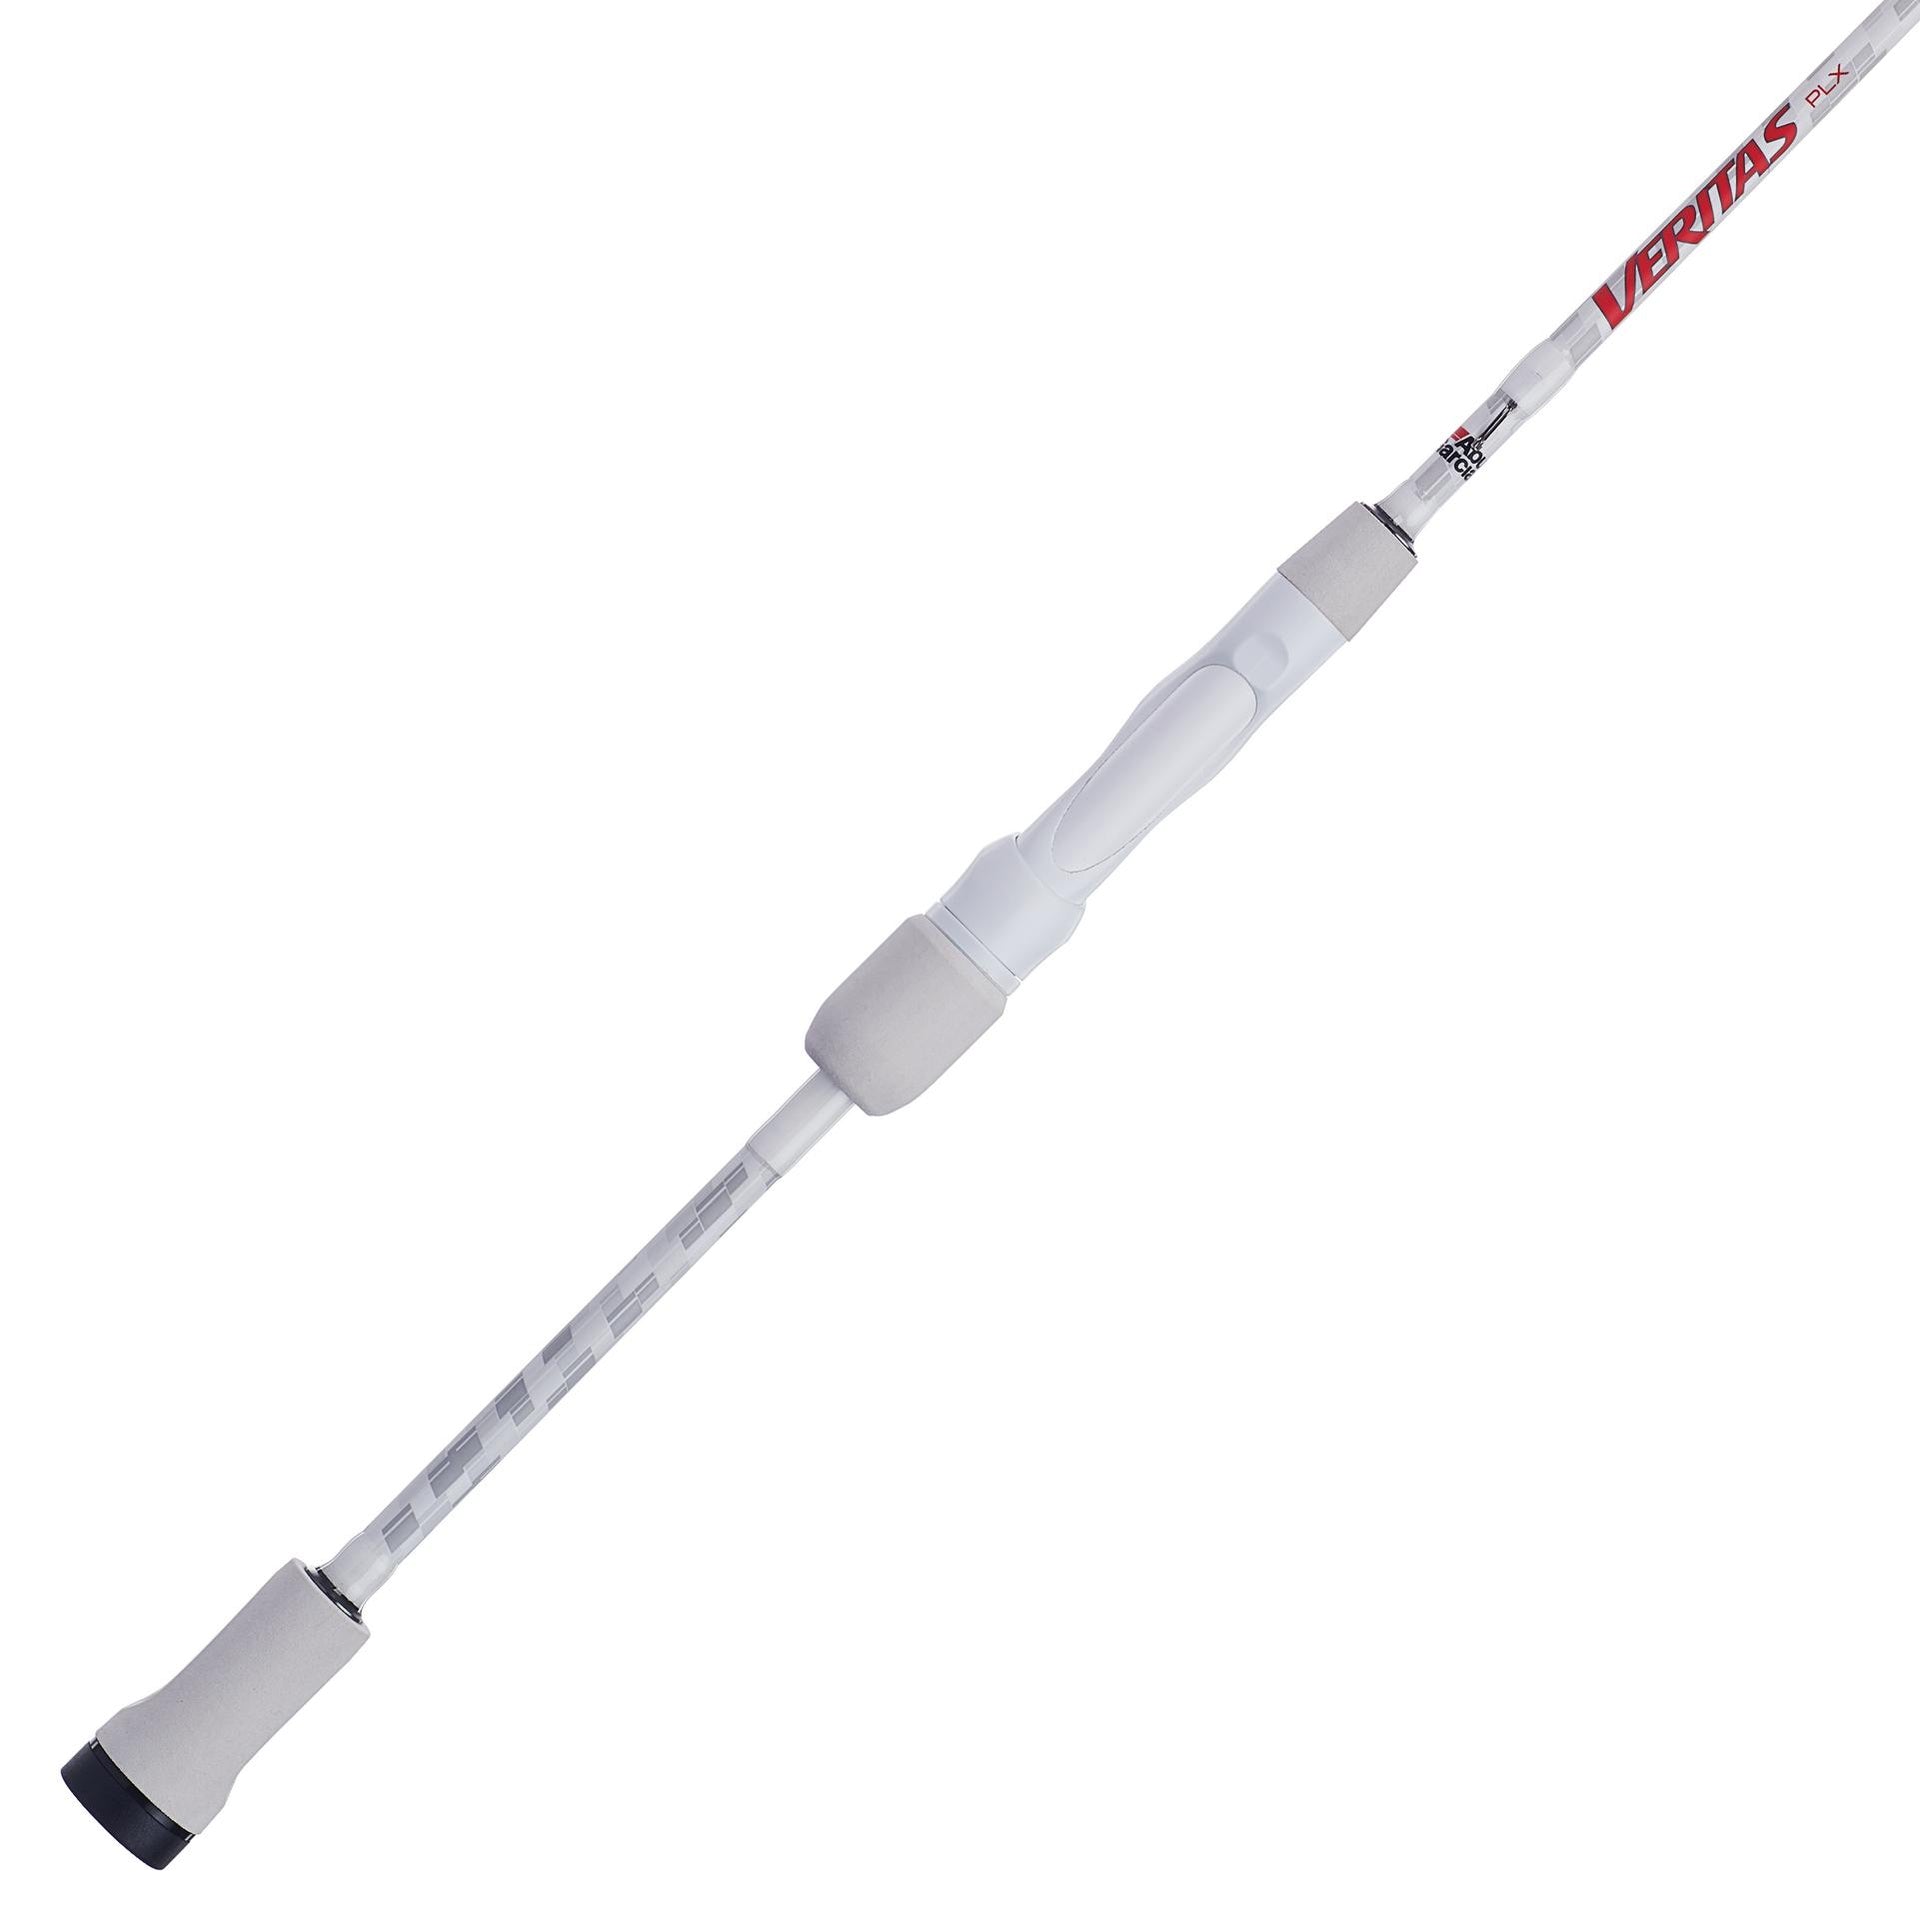 Abu Garcia Fishing Rods, Reels, and other Fishing Tackle – Abu